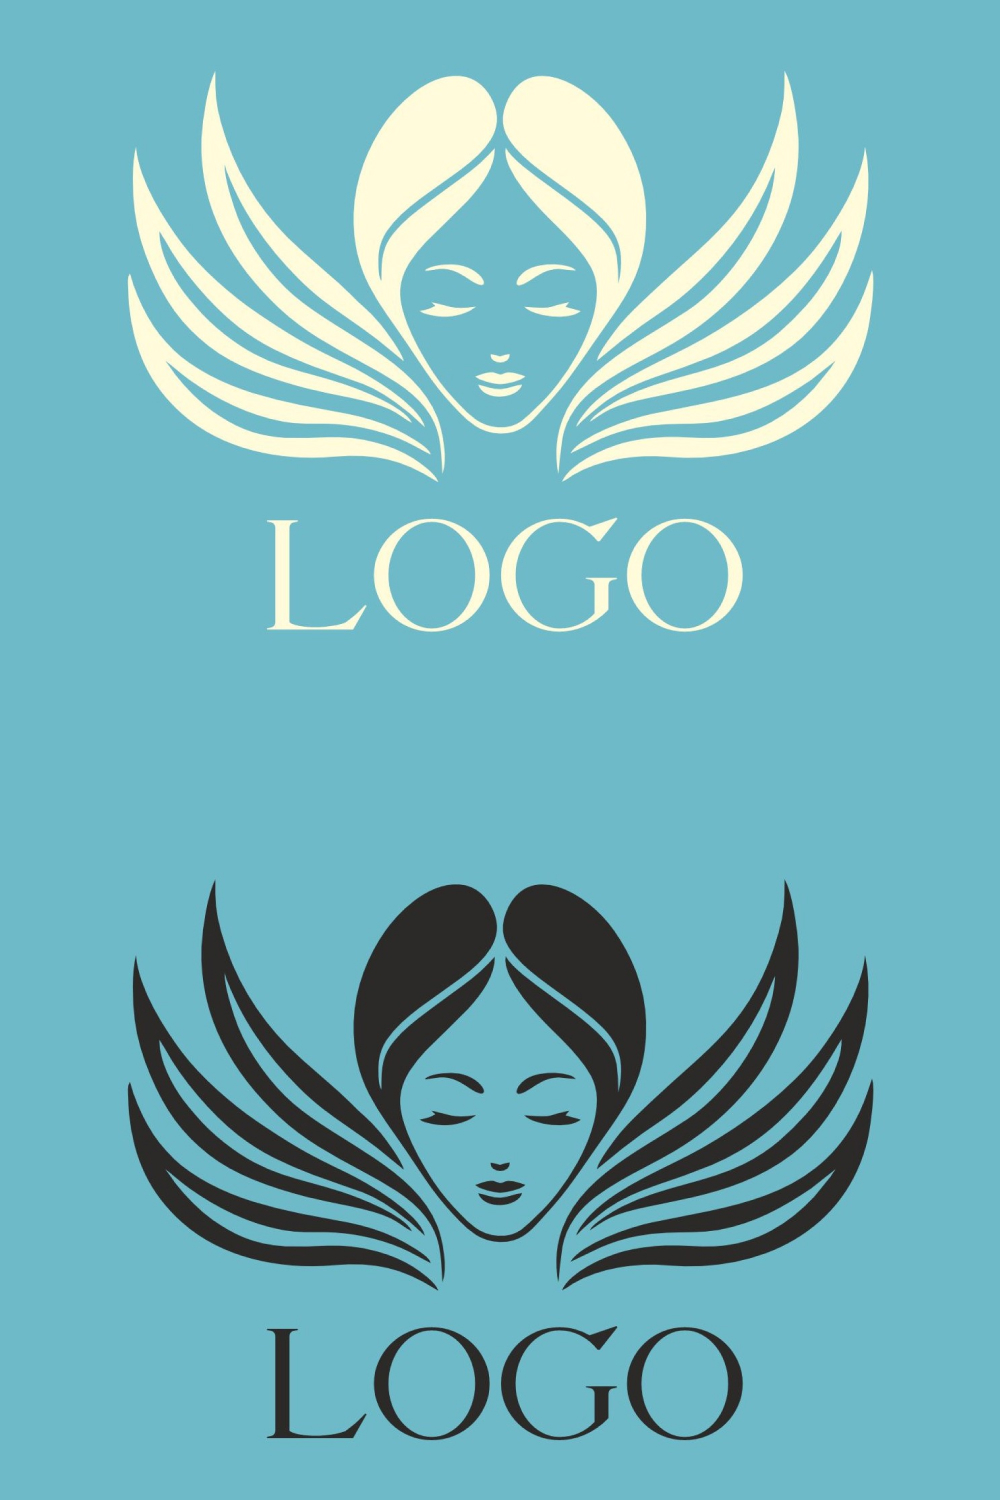 The logo with the image of a female face and wings pinterest preview image.